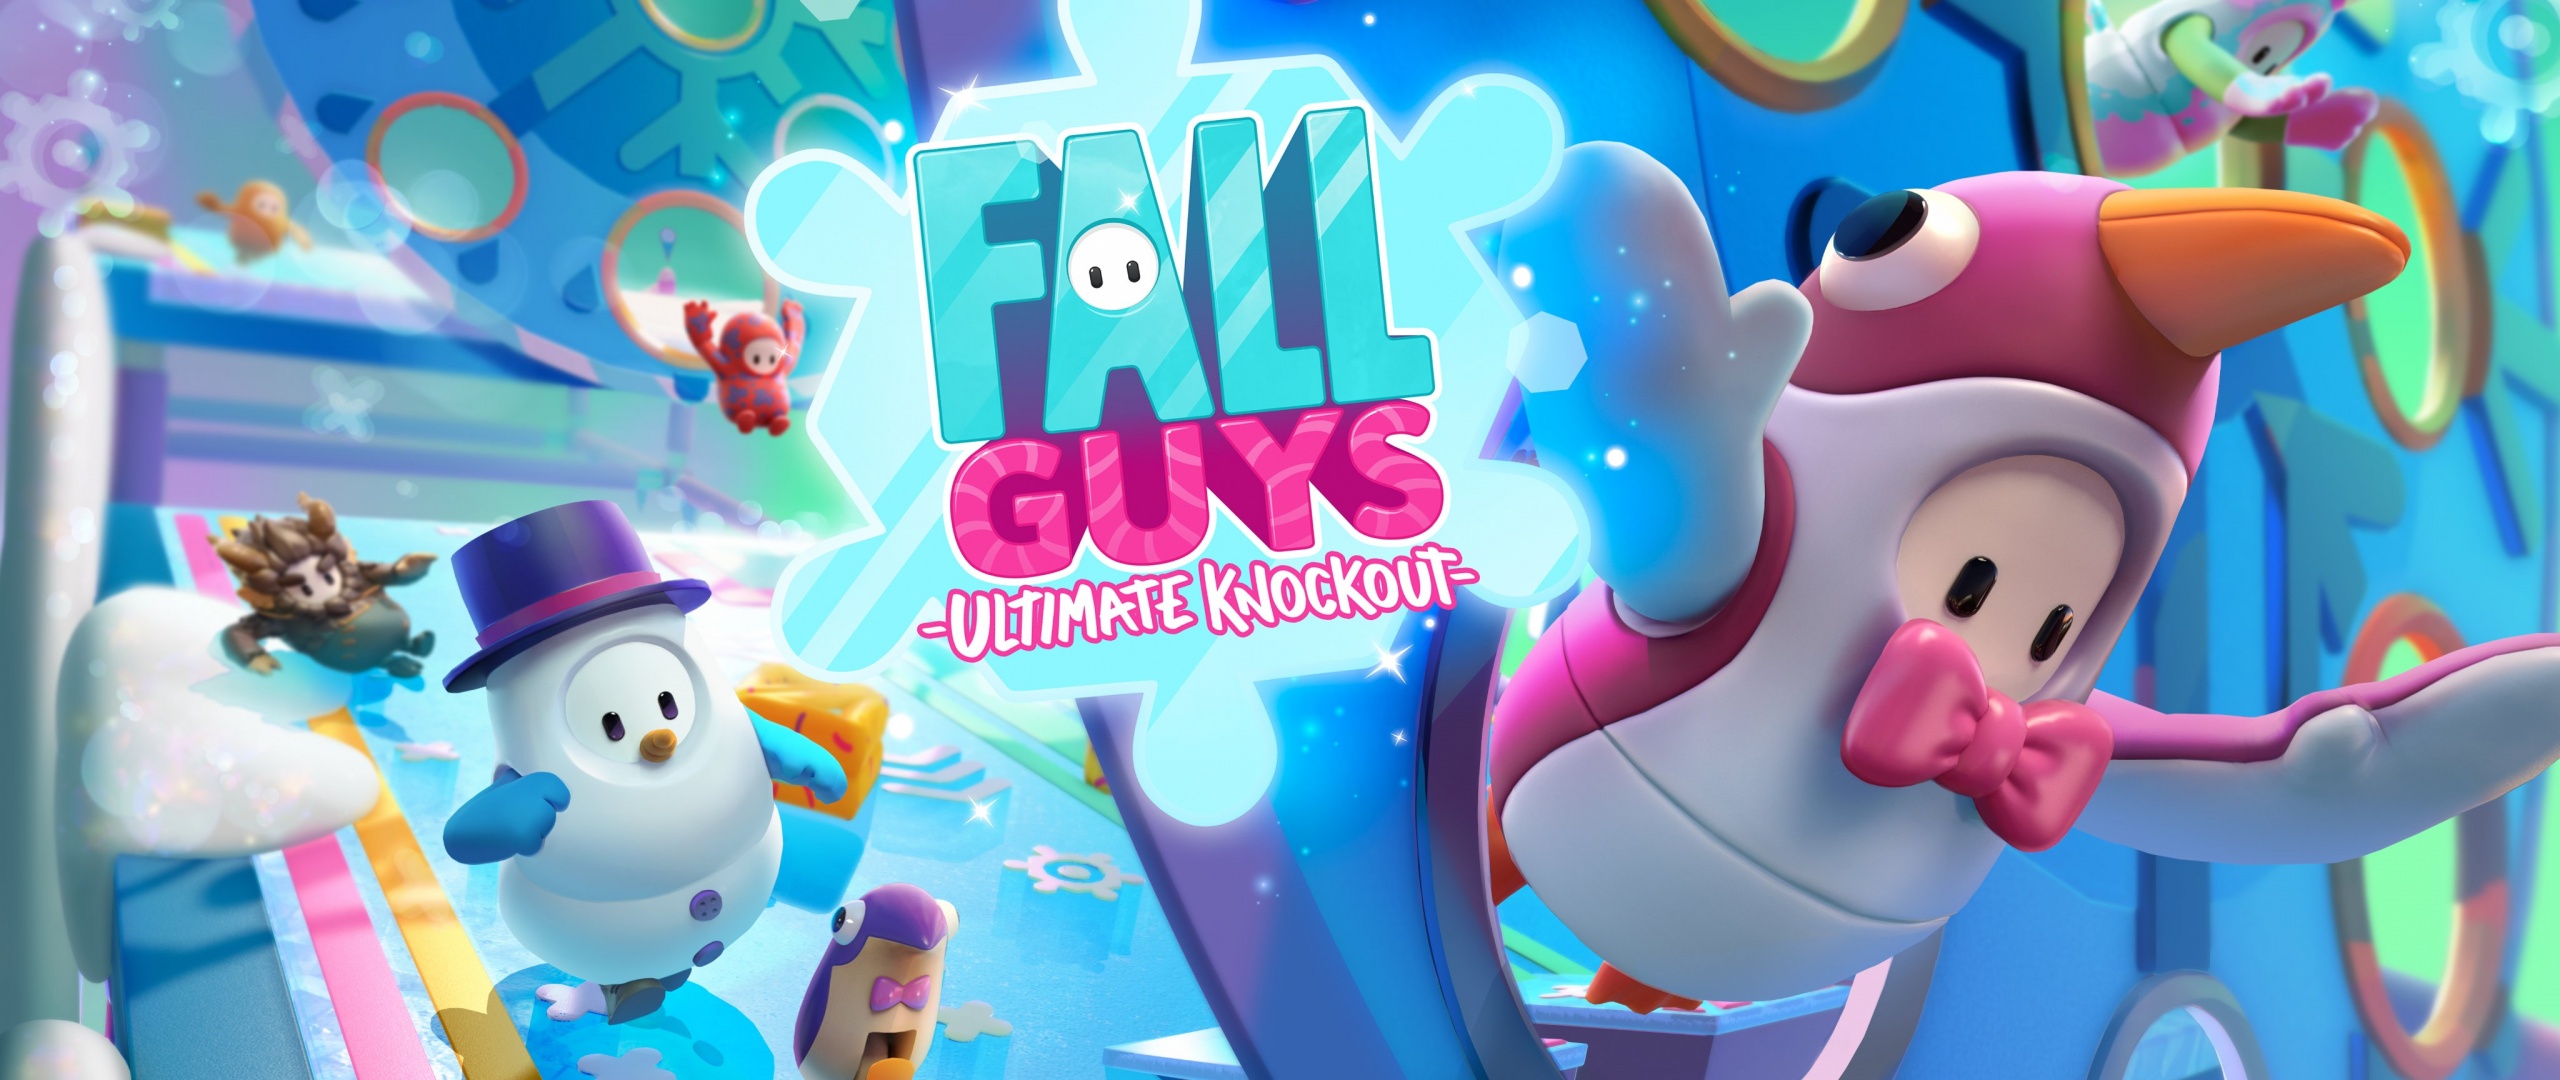 Fall Guys: Ultimate Knockout Wallpaper 4K, PC Games, PlayStation 4